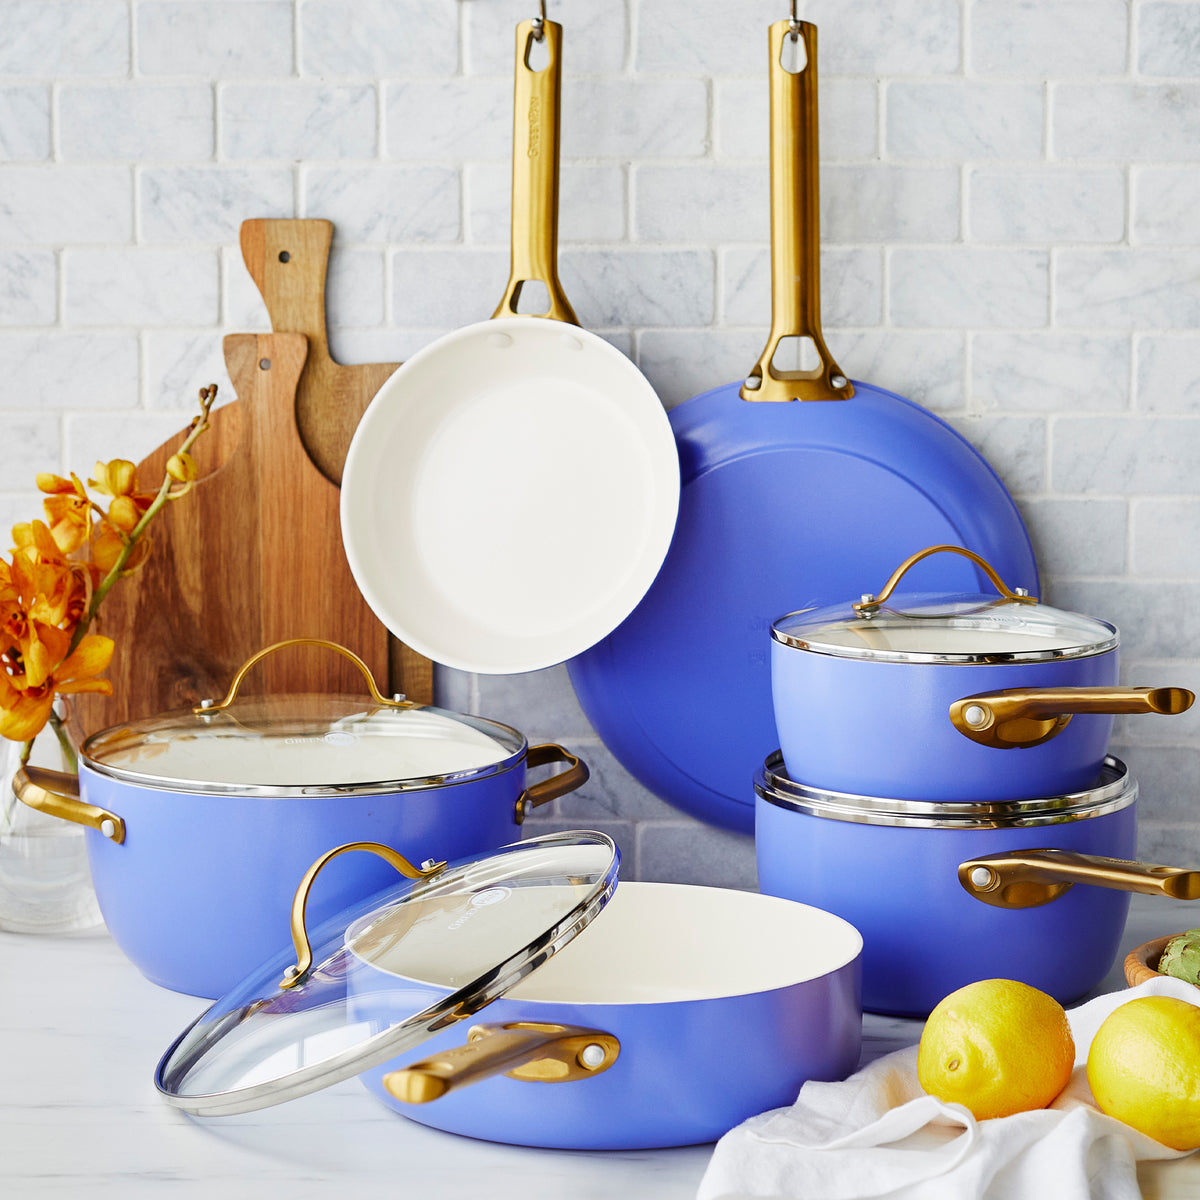 Navy and Gold Nonstick Pots and Pans Set